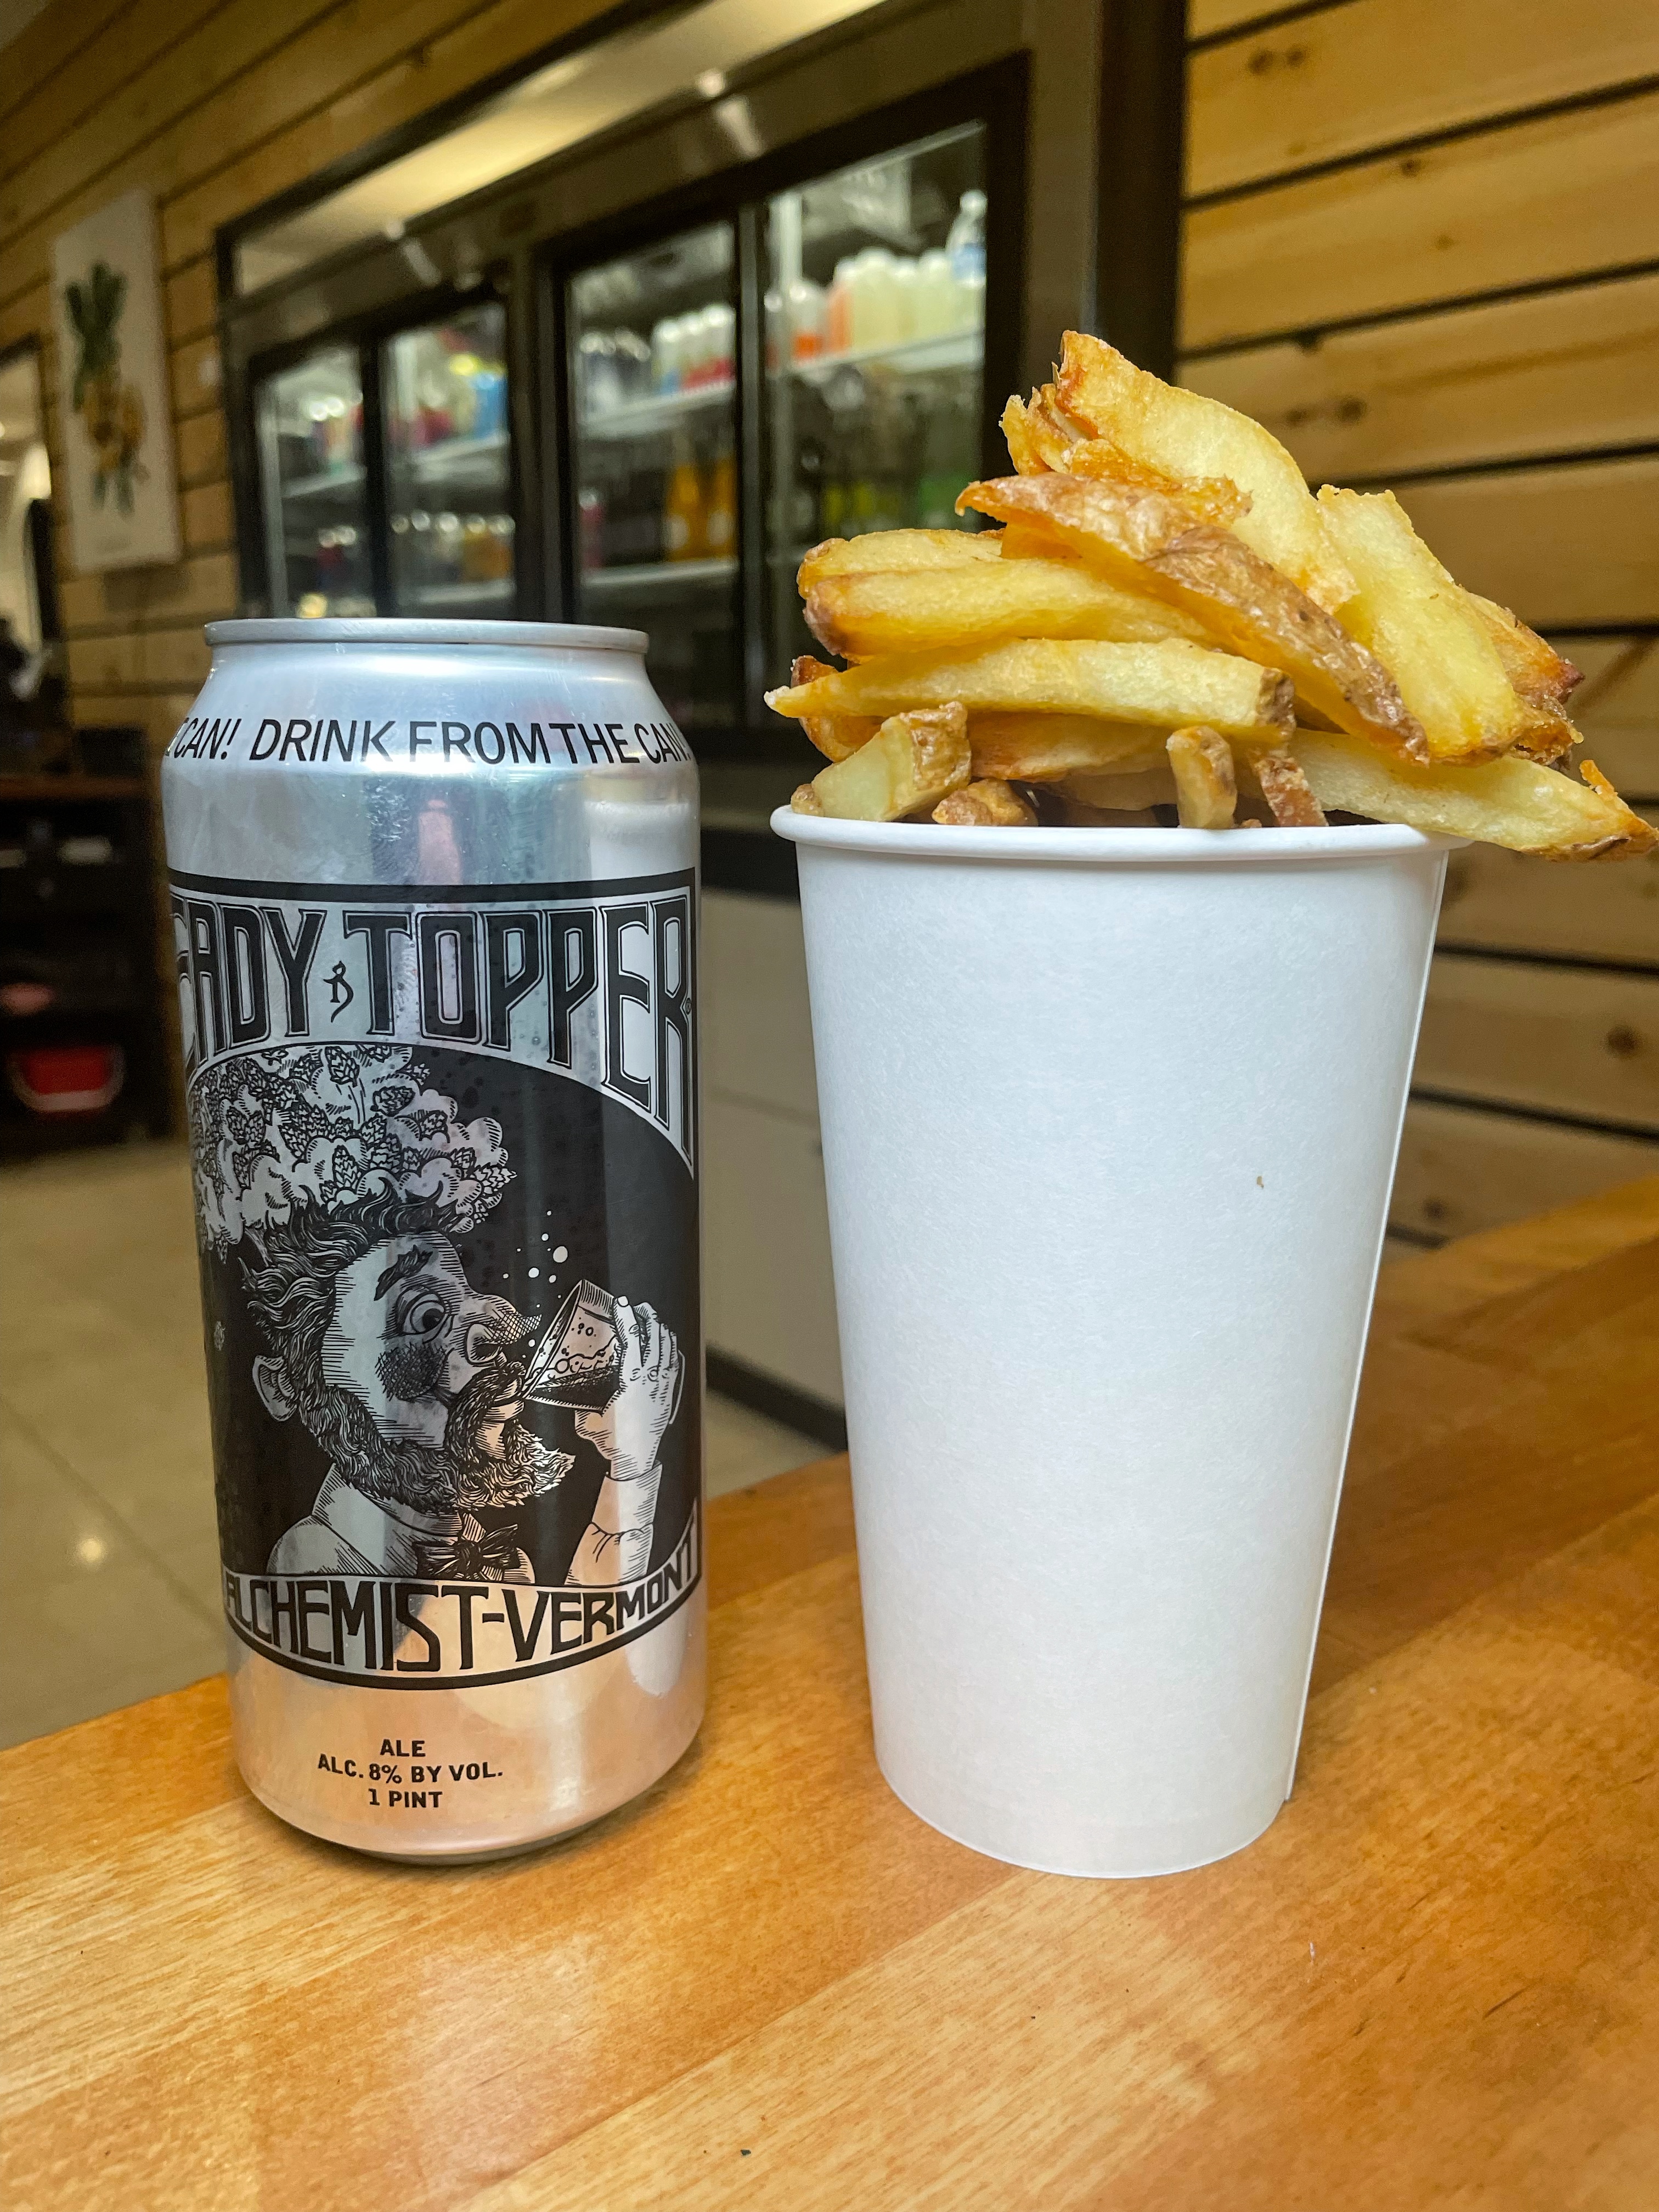 Craft beer and French fries